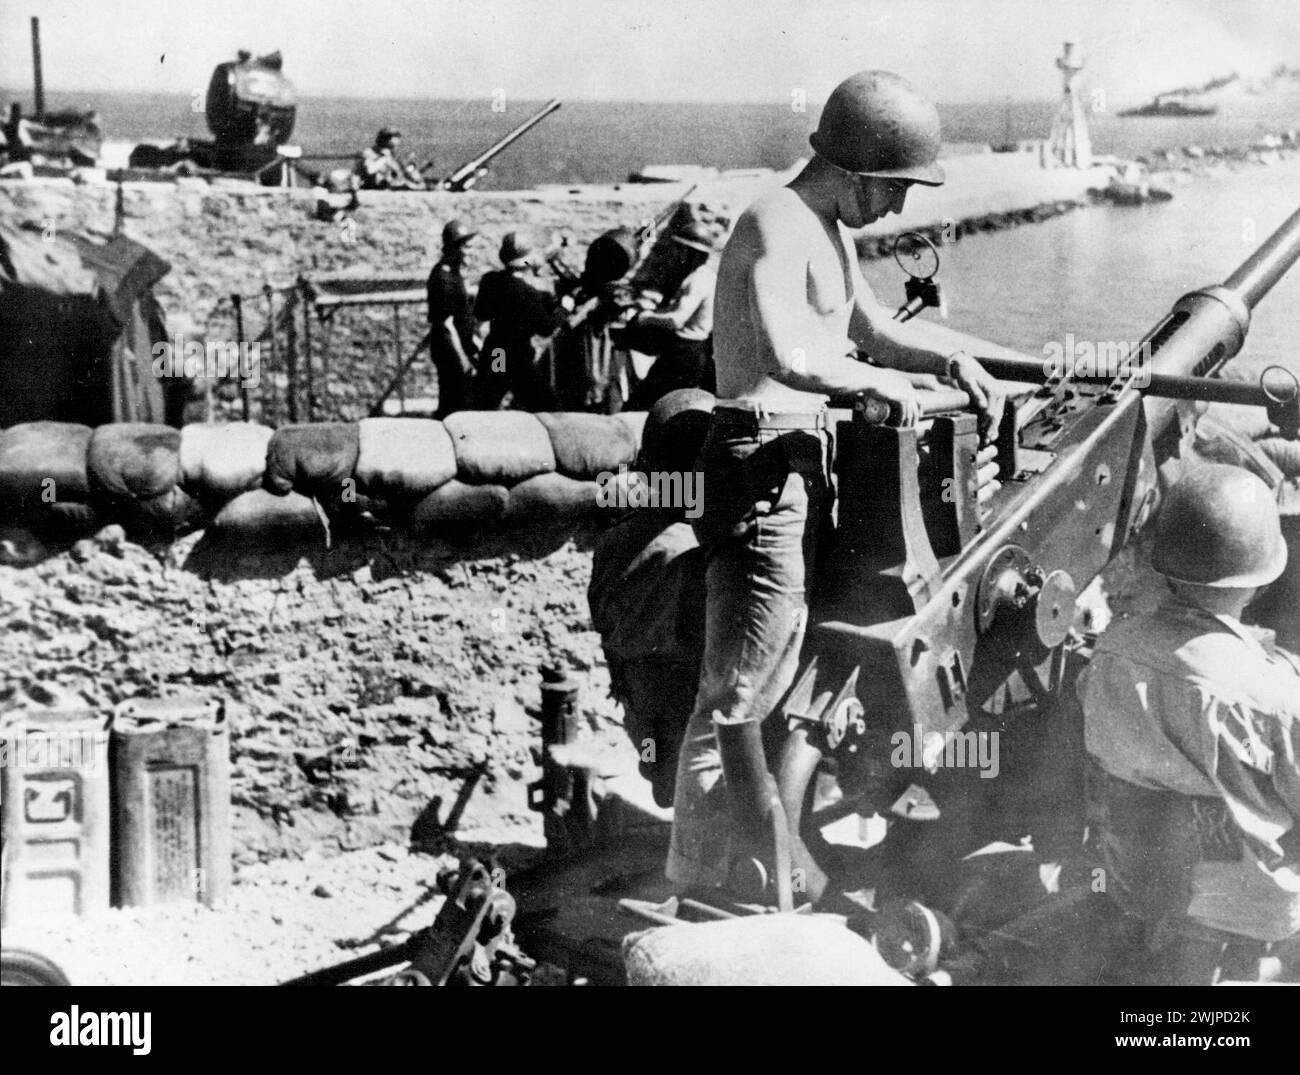 Gunners From Three Nations Protect Harbour In North Africa -- The unity of the United Nations is illustrated in this picture of three anti-aircraft batteries protecting - a worth African harbor. In the foreground is an American crew manning a Bofors gun. Beyond the sandbags, French anti-aircraft artillerymen stand by an Oerlikon gun while in the background a British crew mans another Bofors. January 1, 1943. Stock Photo